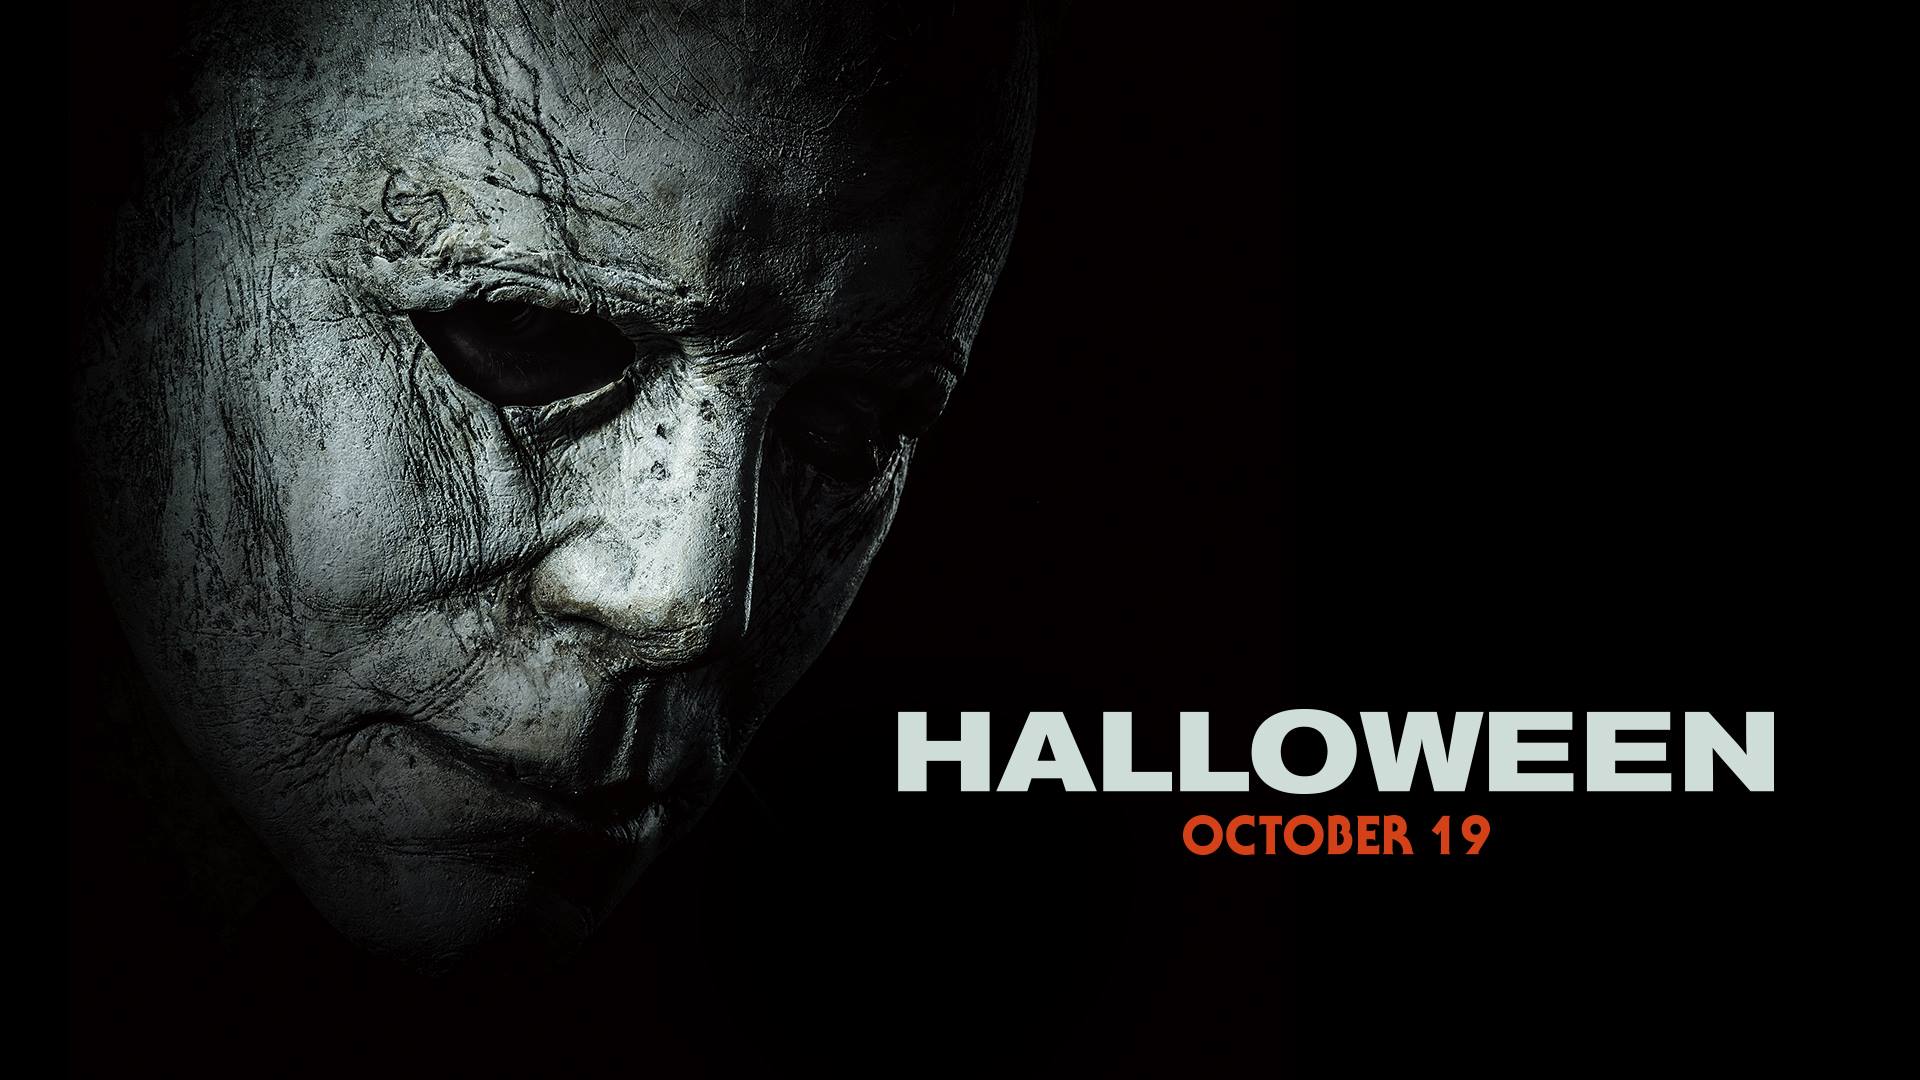 Michael Myers fans are in for a treat with these 2018 Halloween movie quotes & trivia! Check them out before the film releases on October 19th!